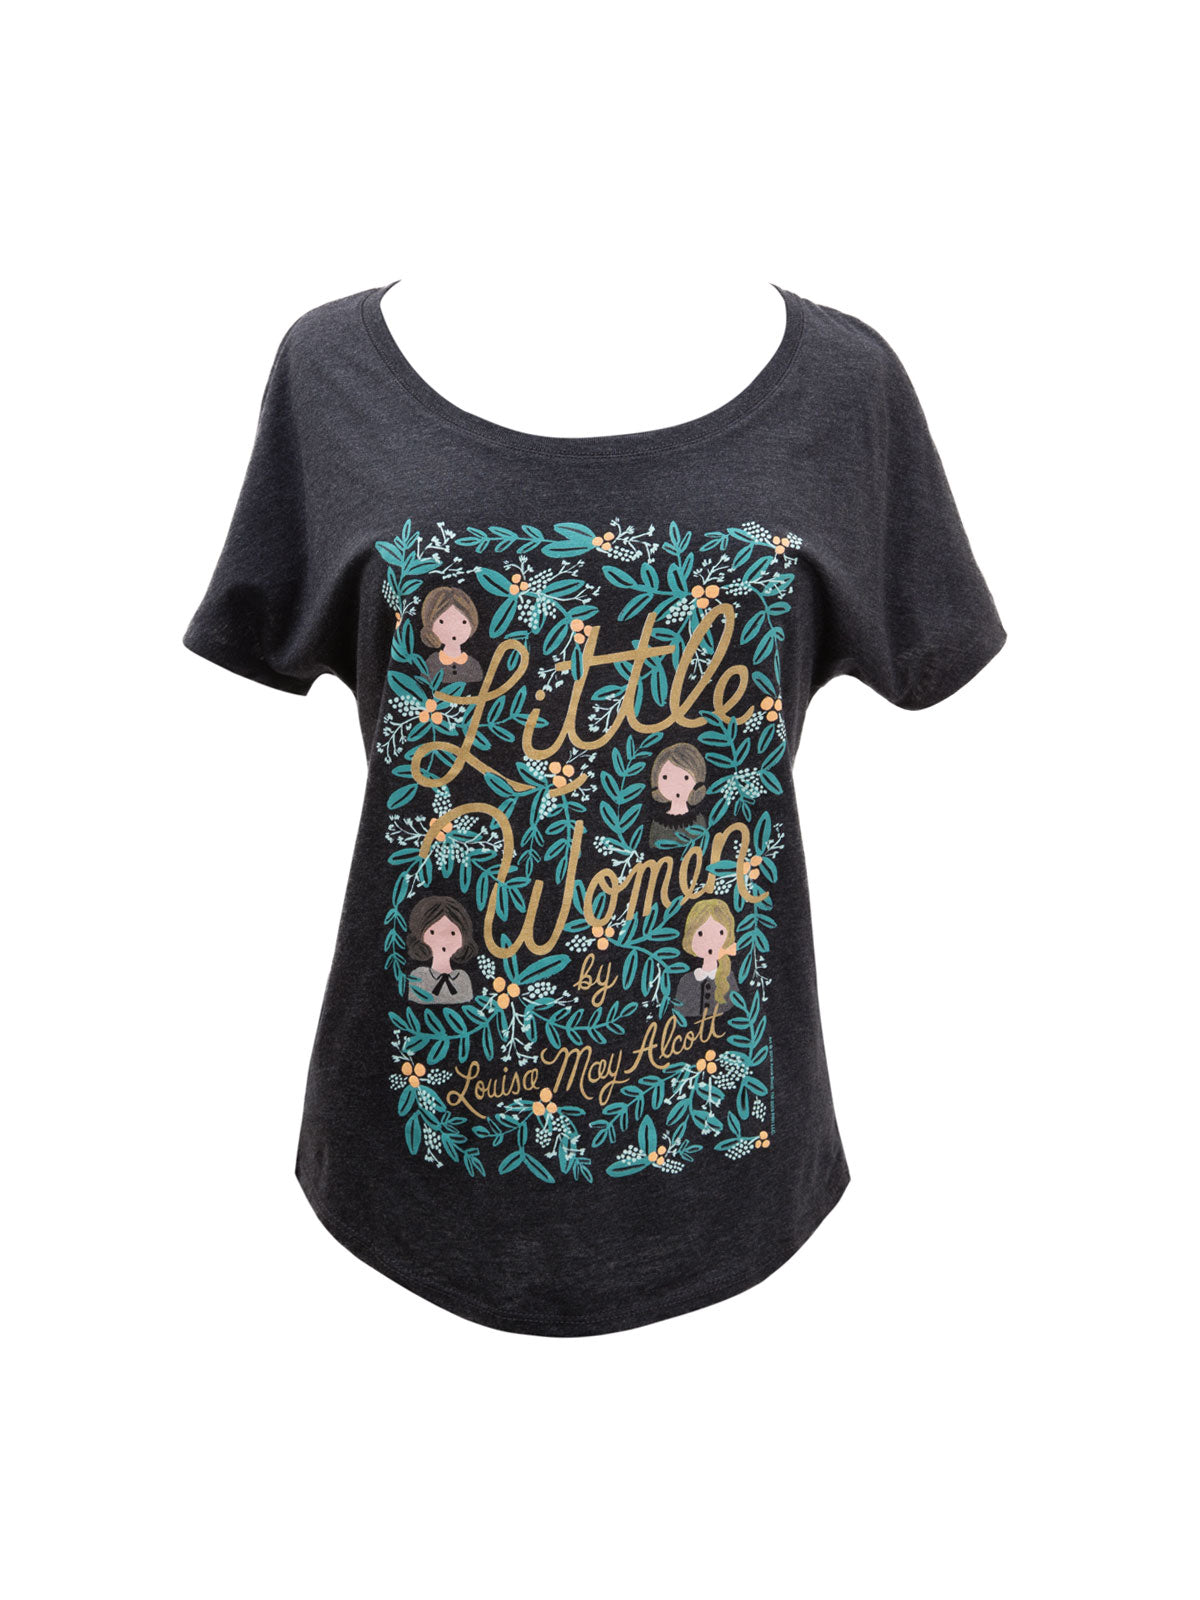 Little Women - Puffin in Bloom women's relaxed fit t-shirt — Out of Print